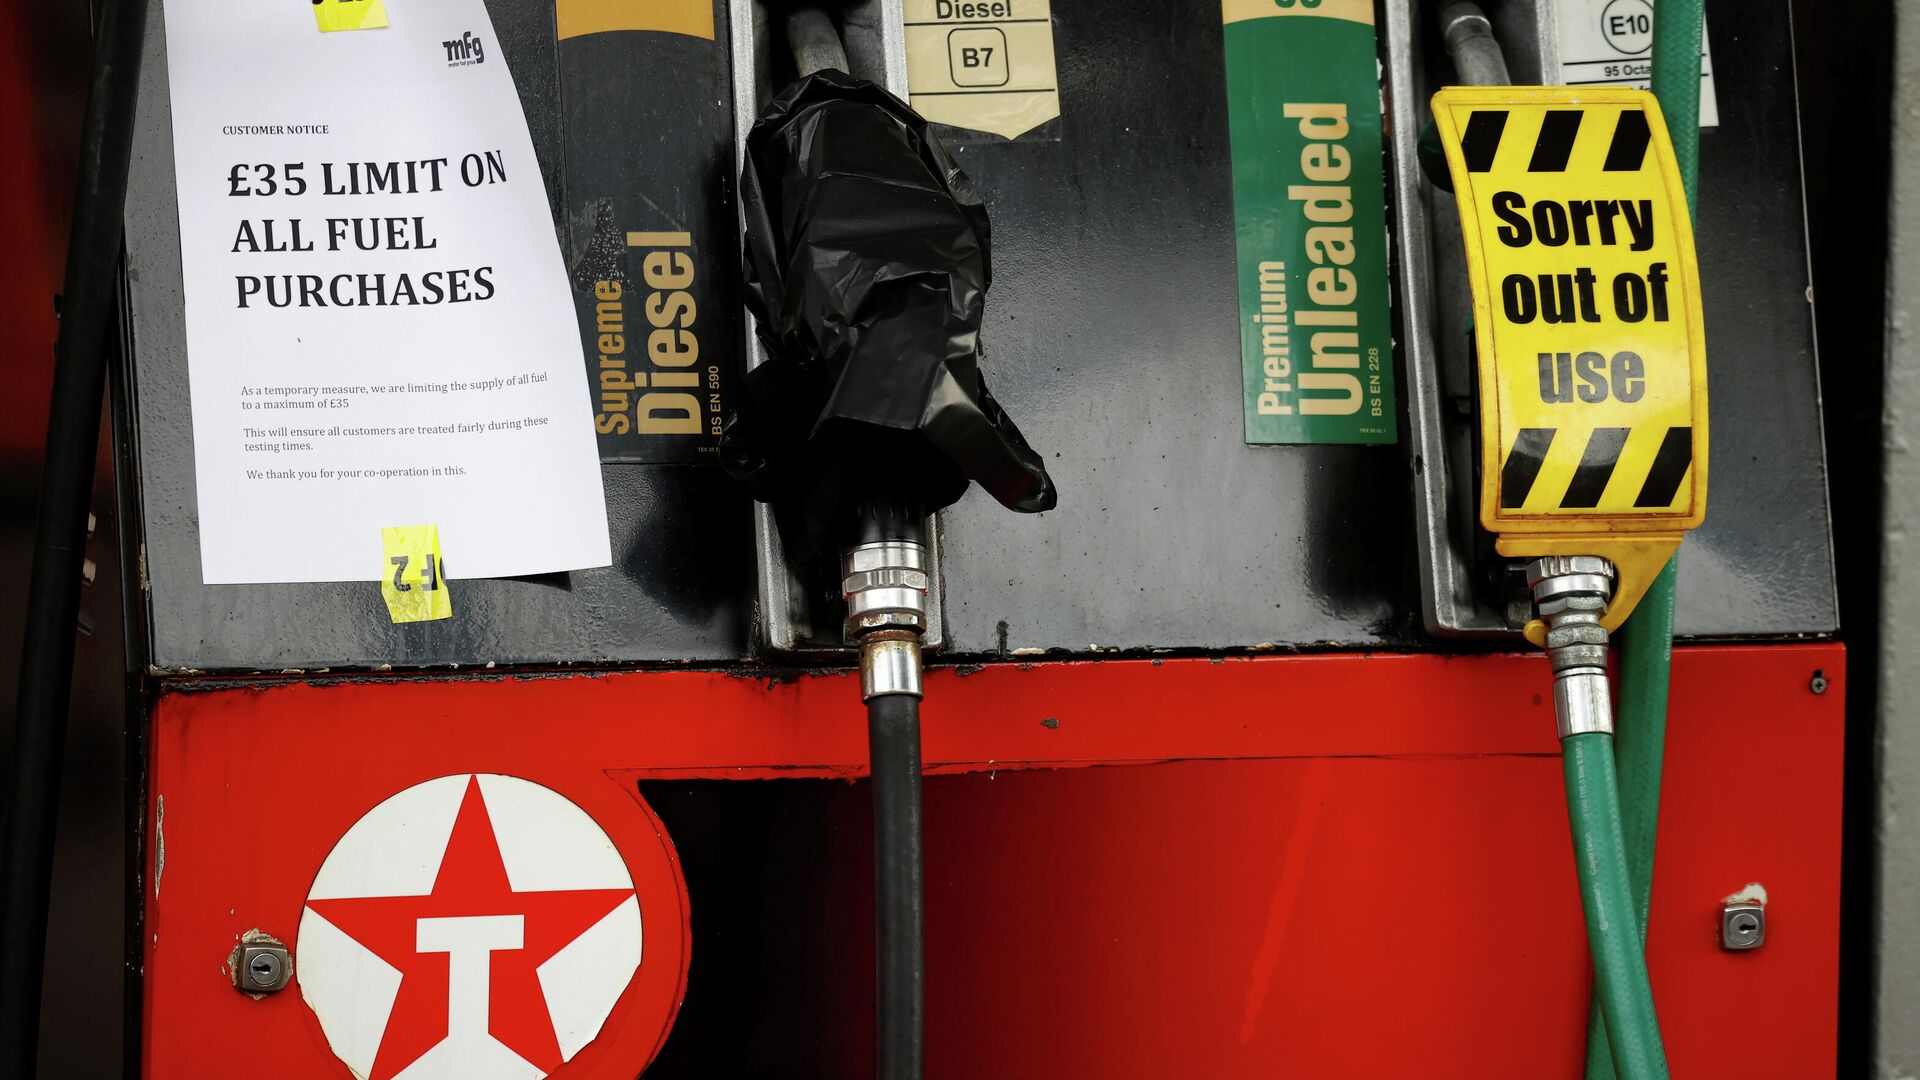 A sign advising people about a limit on fuel is attached to an empty petrol pump at a Texaco filling station in Manchester, Britain, September 28, 2021. - Sputnik International, 1920, 15.10.2021